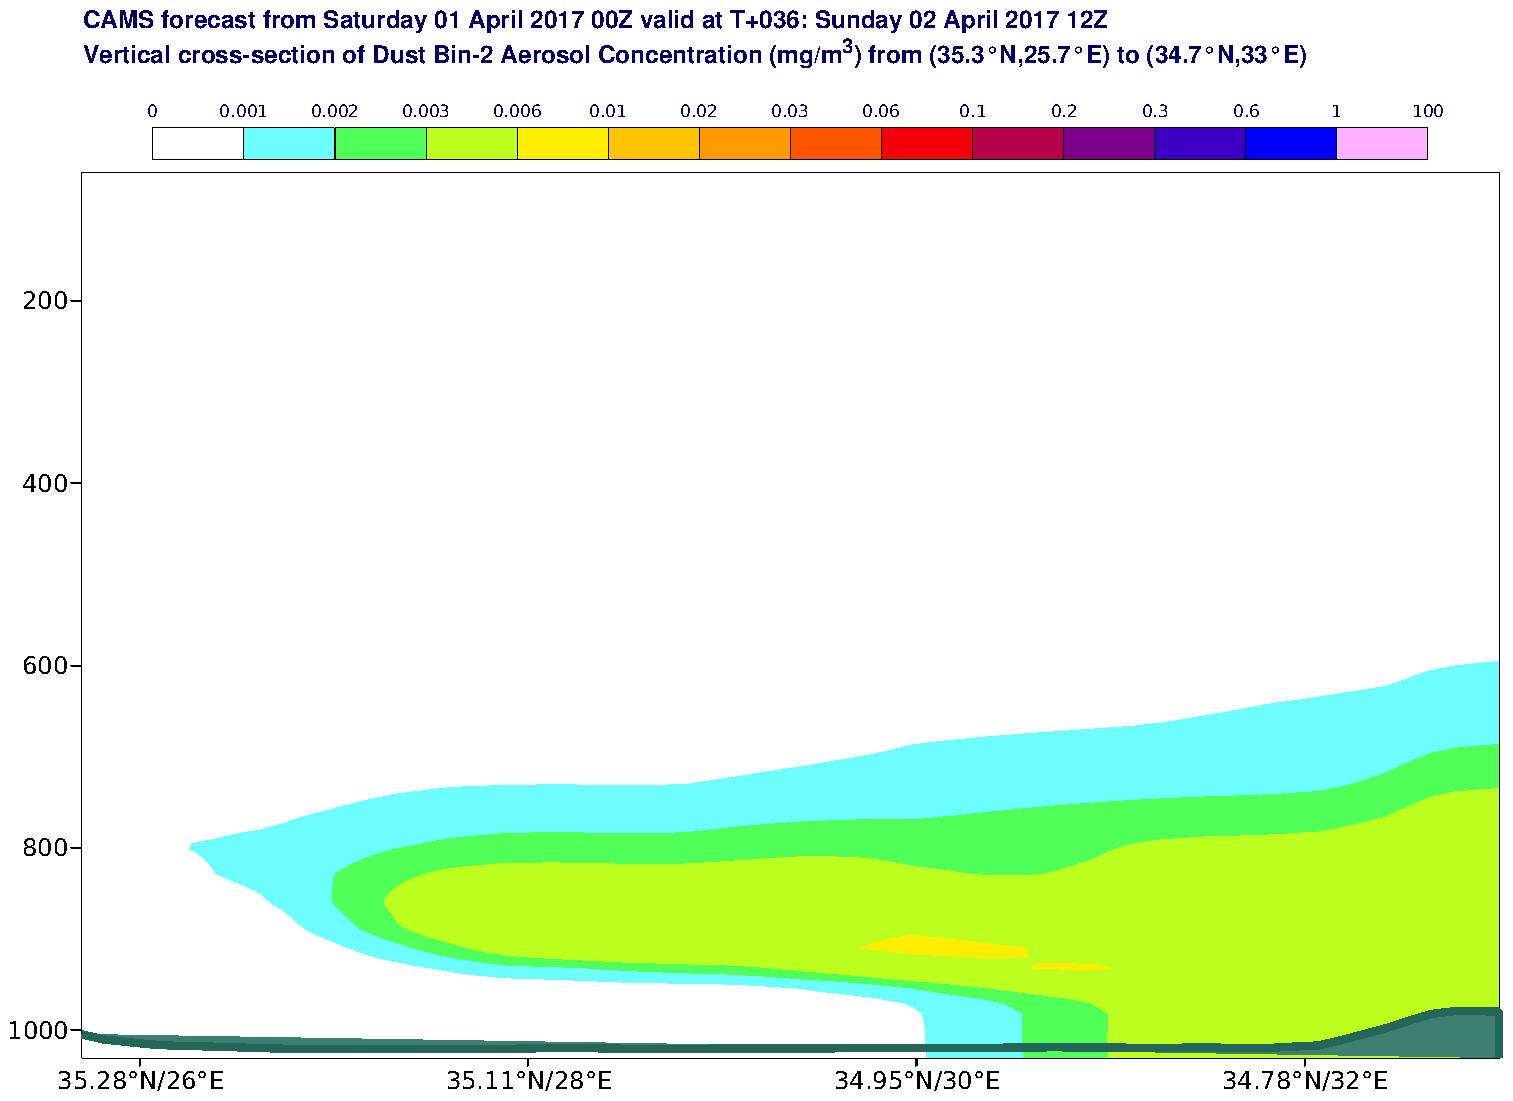 Vertical cross-section of Dust Bin-2 Aerosol Concentration (mg/m3) valid at T36 - 2017-04-02 12:00